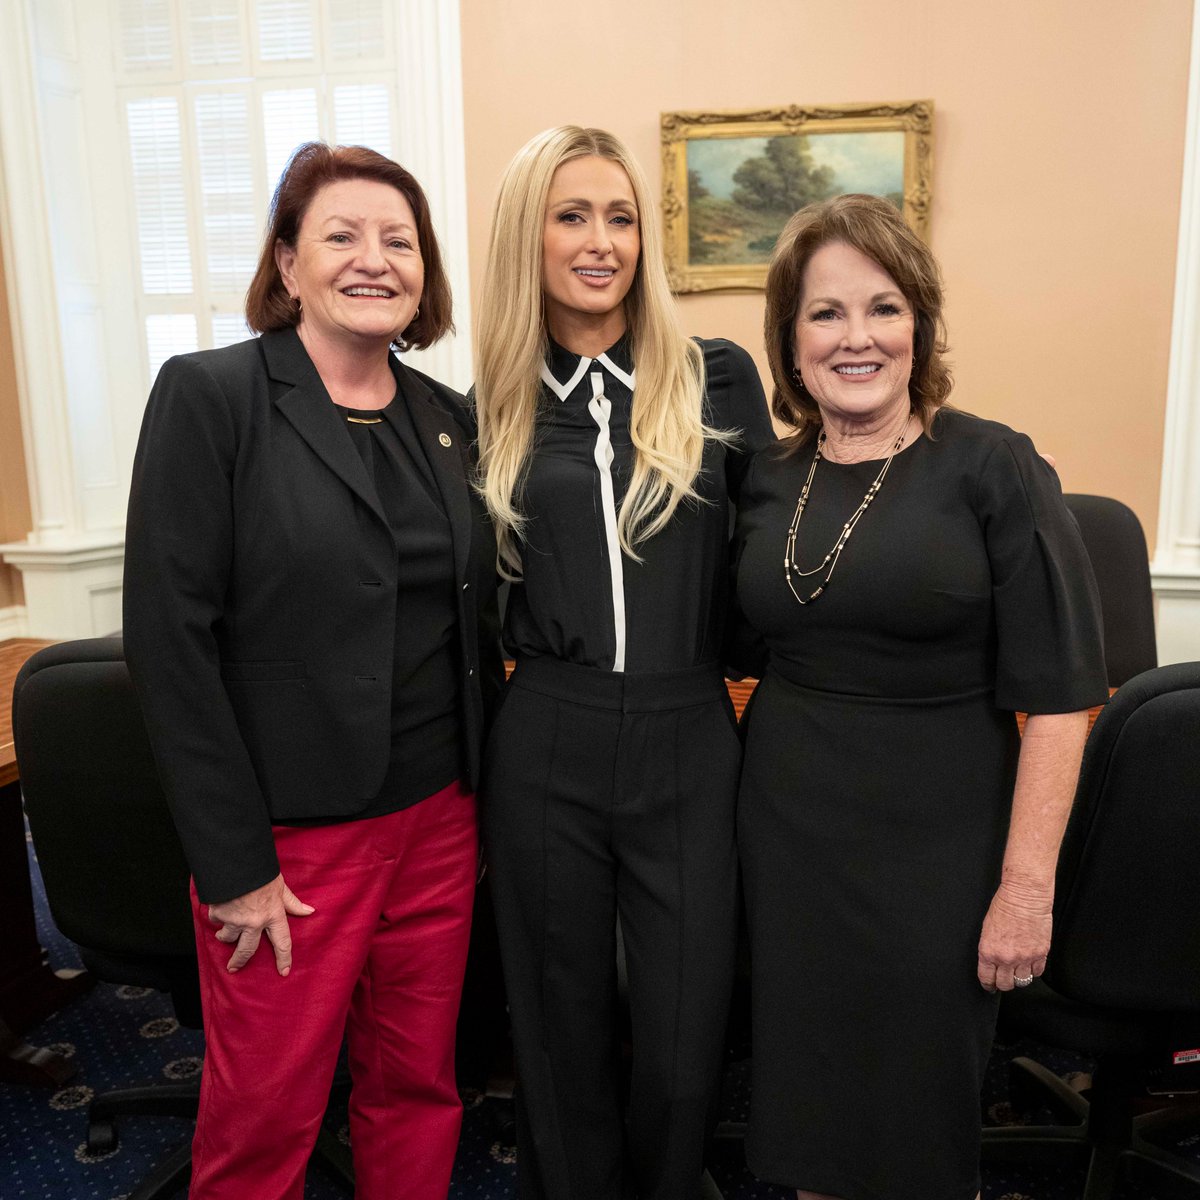 You never know who you’ll run into at the California Capitol! Thank you, @ParisHilton, for coming to share your experiences and advocate for policy solutions!